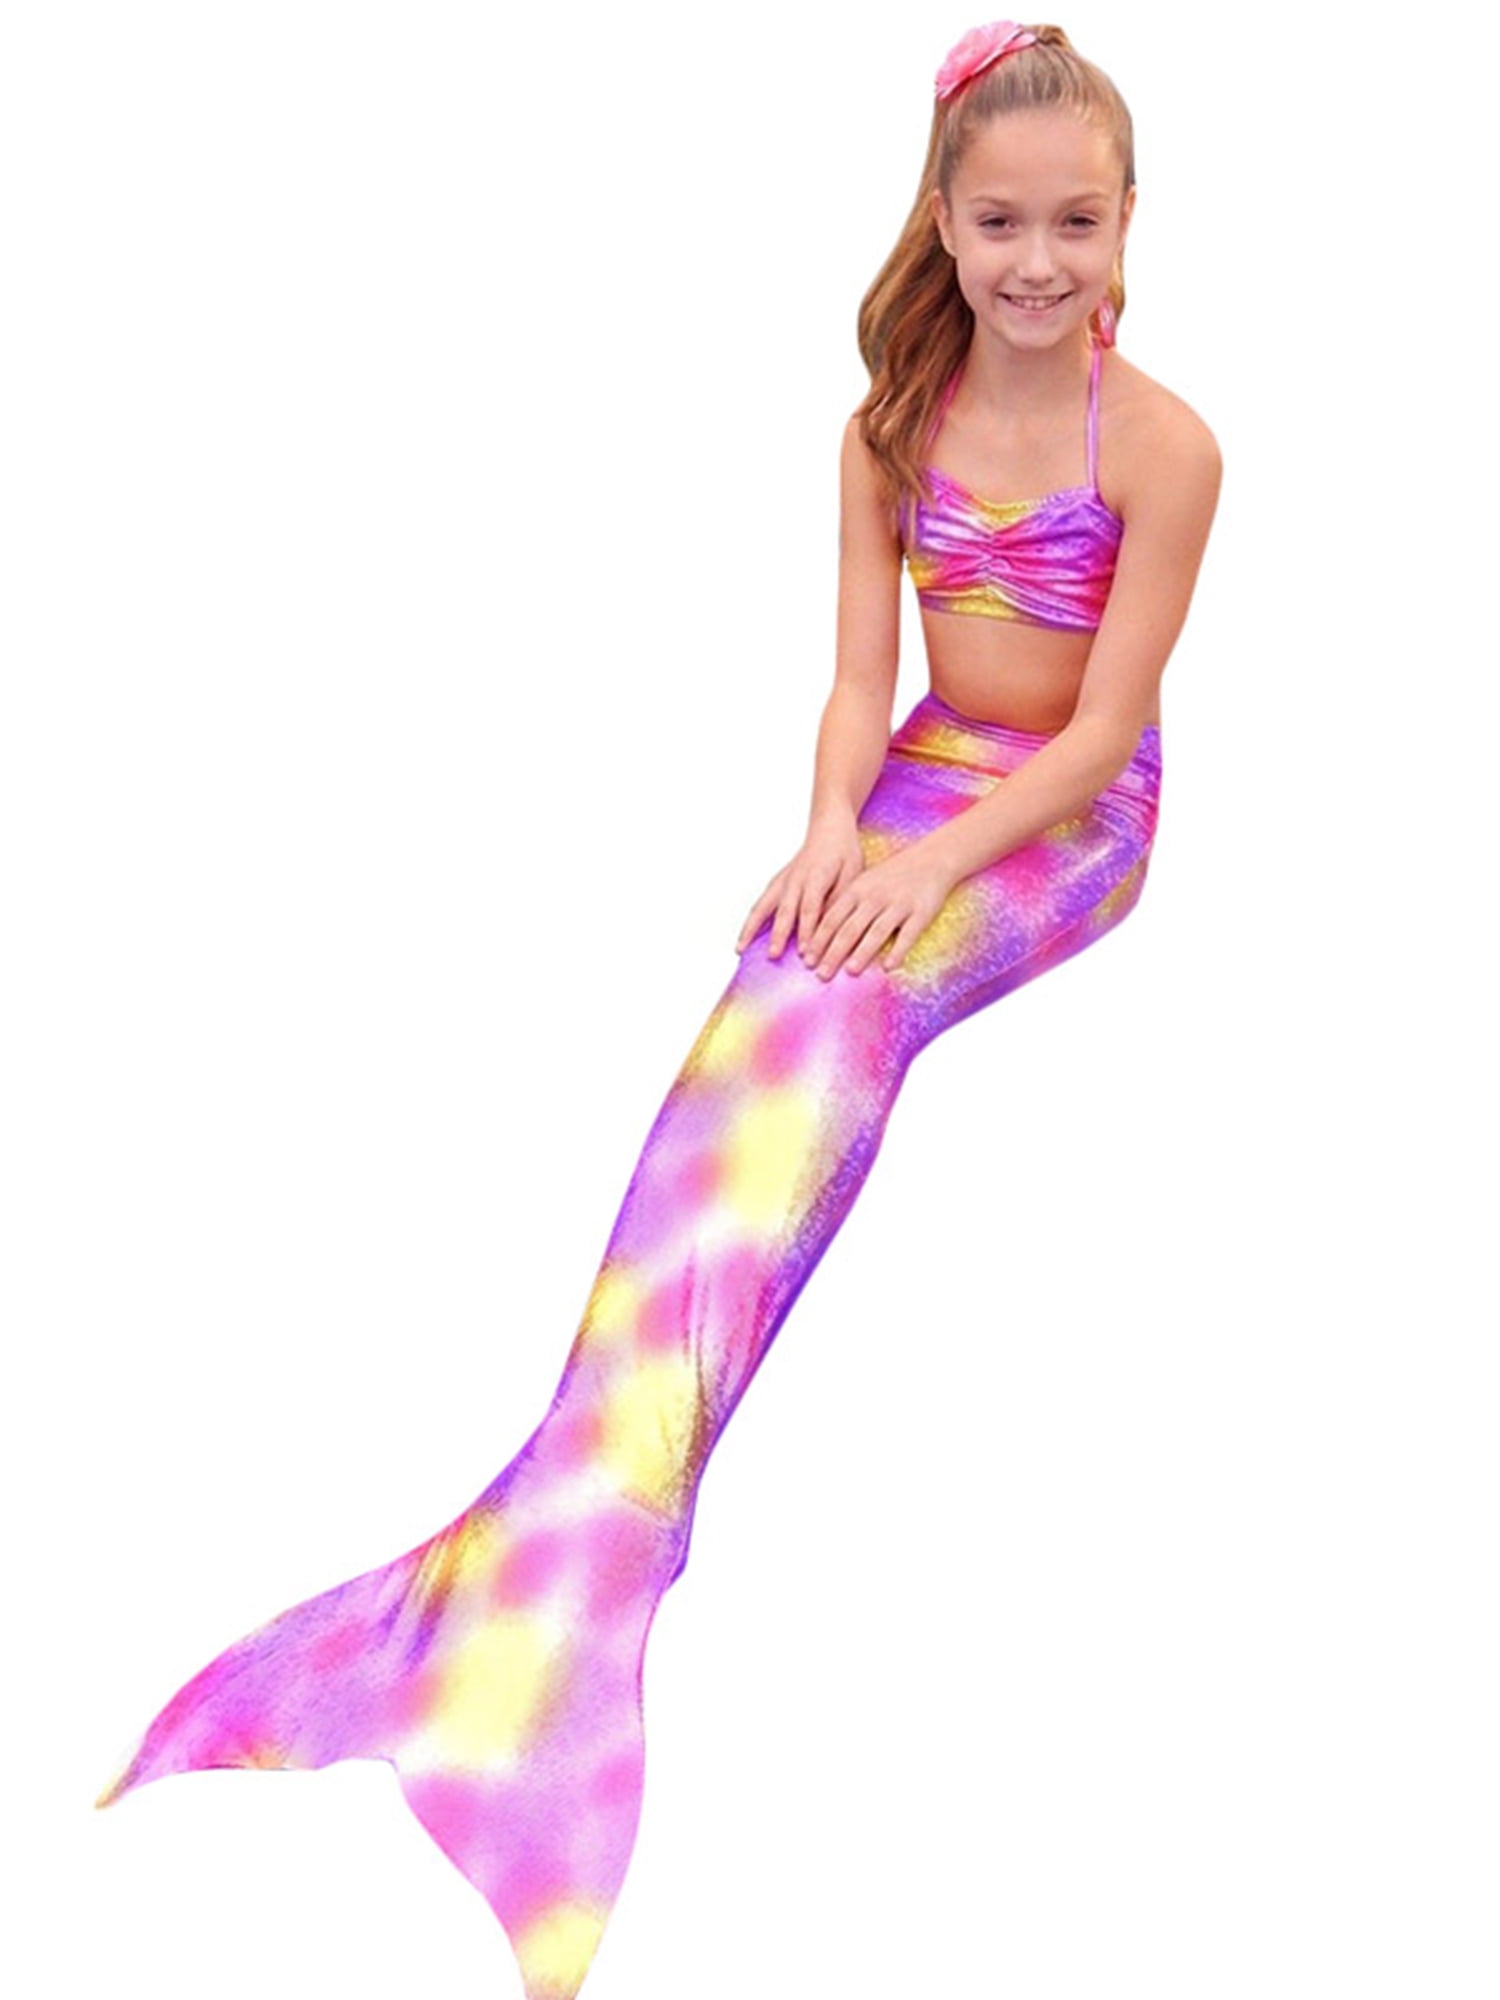 Swimmable Mermaid Tail With Monofin Swimsuit for Girls Women Bikini Bathing Suit